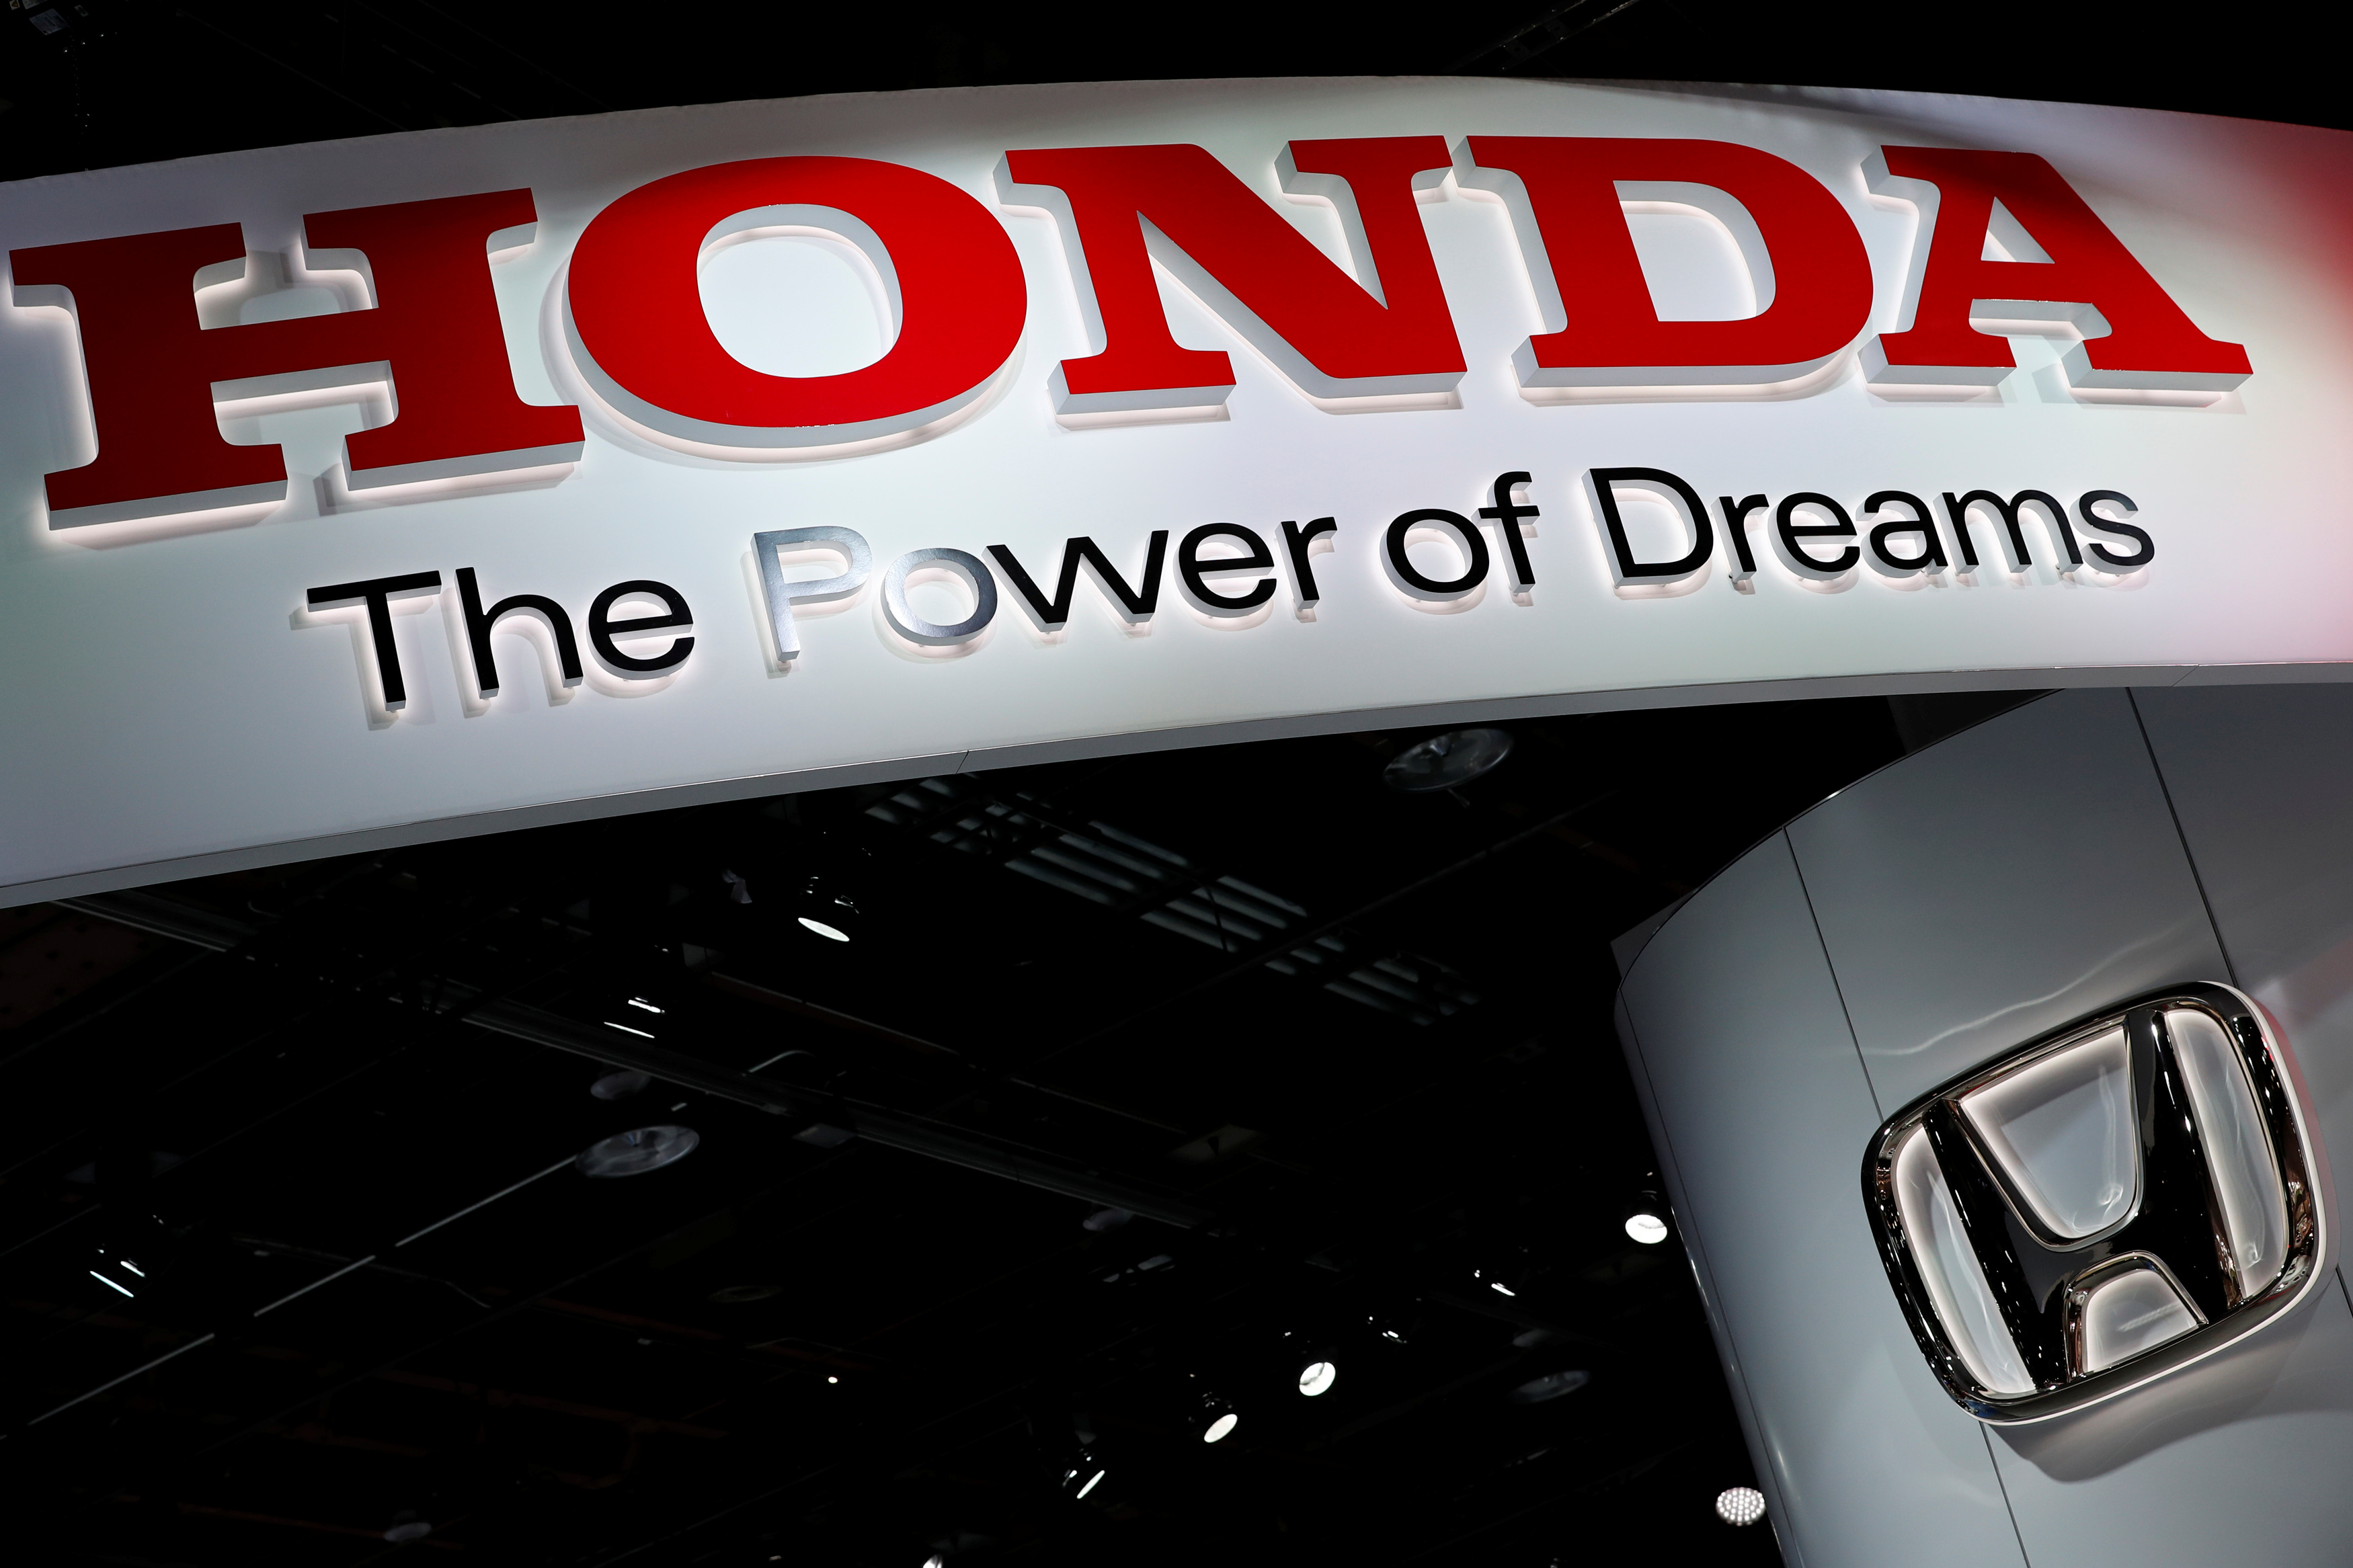 The Honda booth displays the company logo at the North American International Auto Show in Detroit, Michigan, U.S., Jan. 16, 2018.